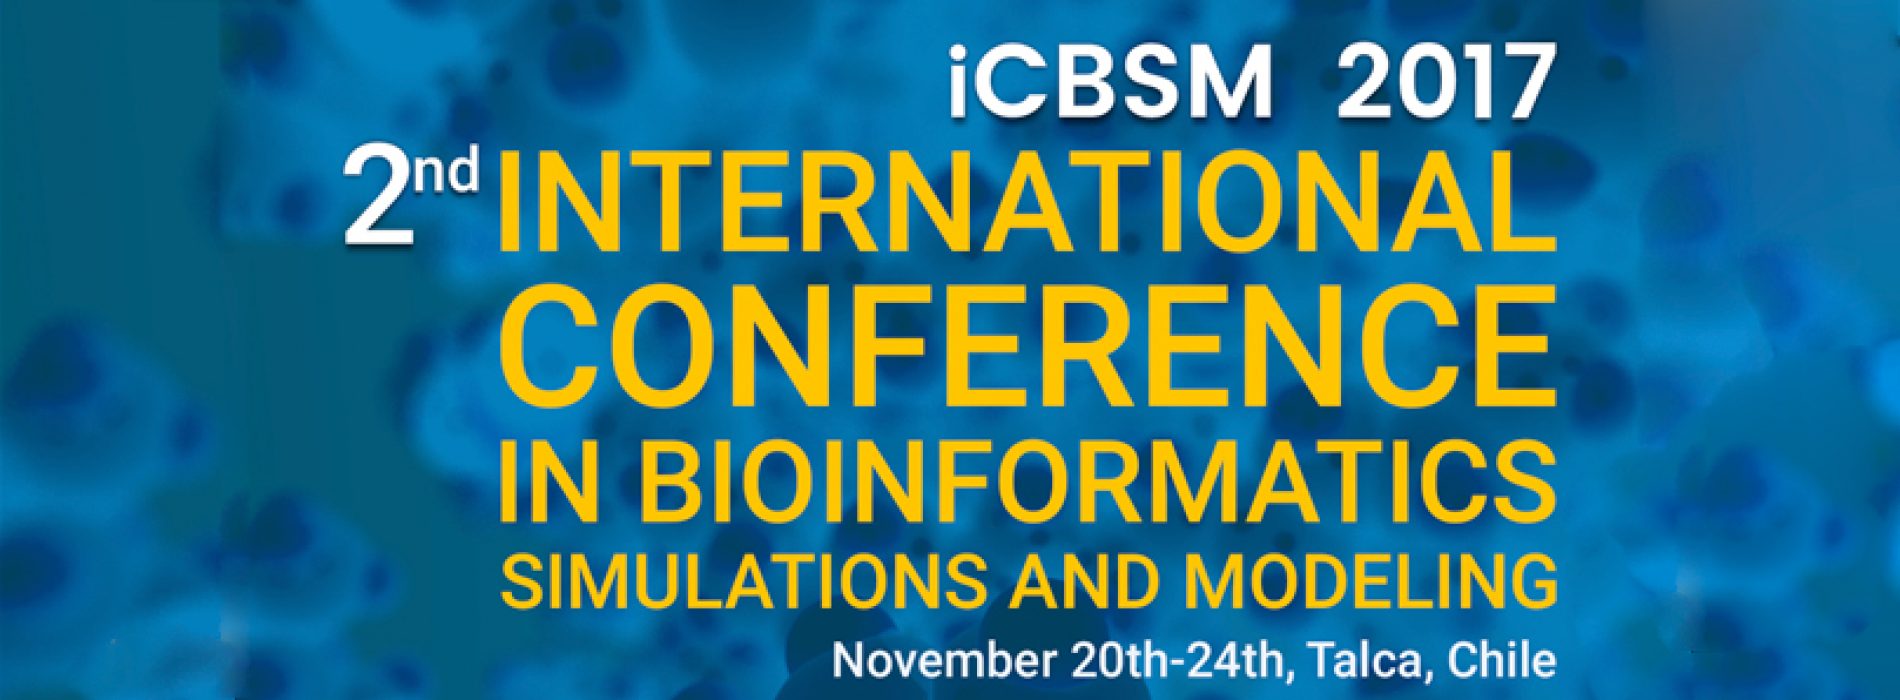 2nd International Conference in Bioinformtics Simulations and Modeling